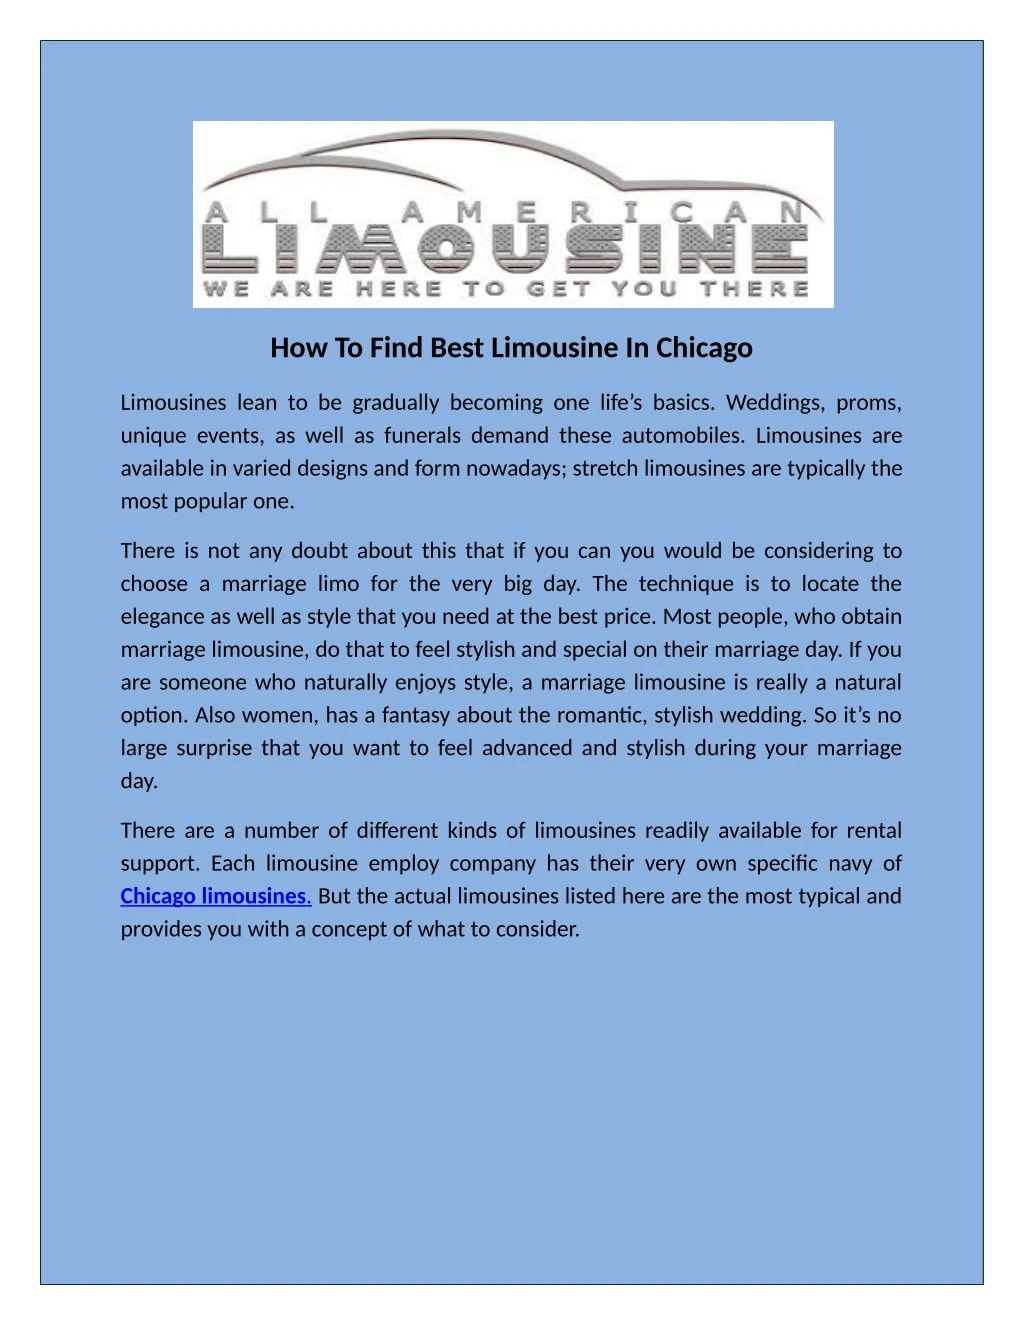 how to find best limousine in chicago